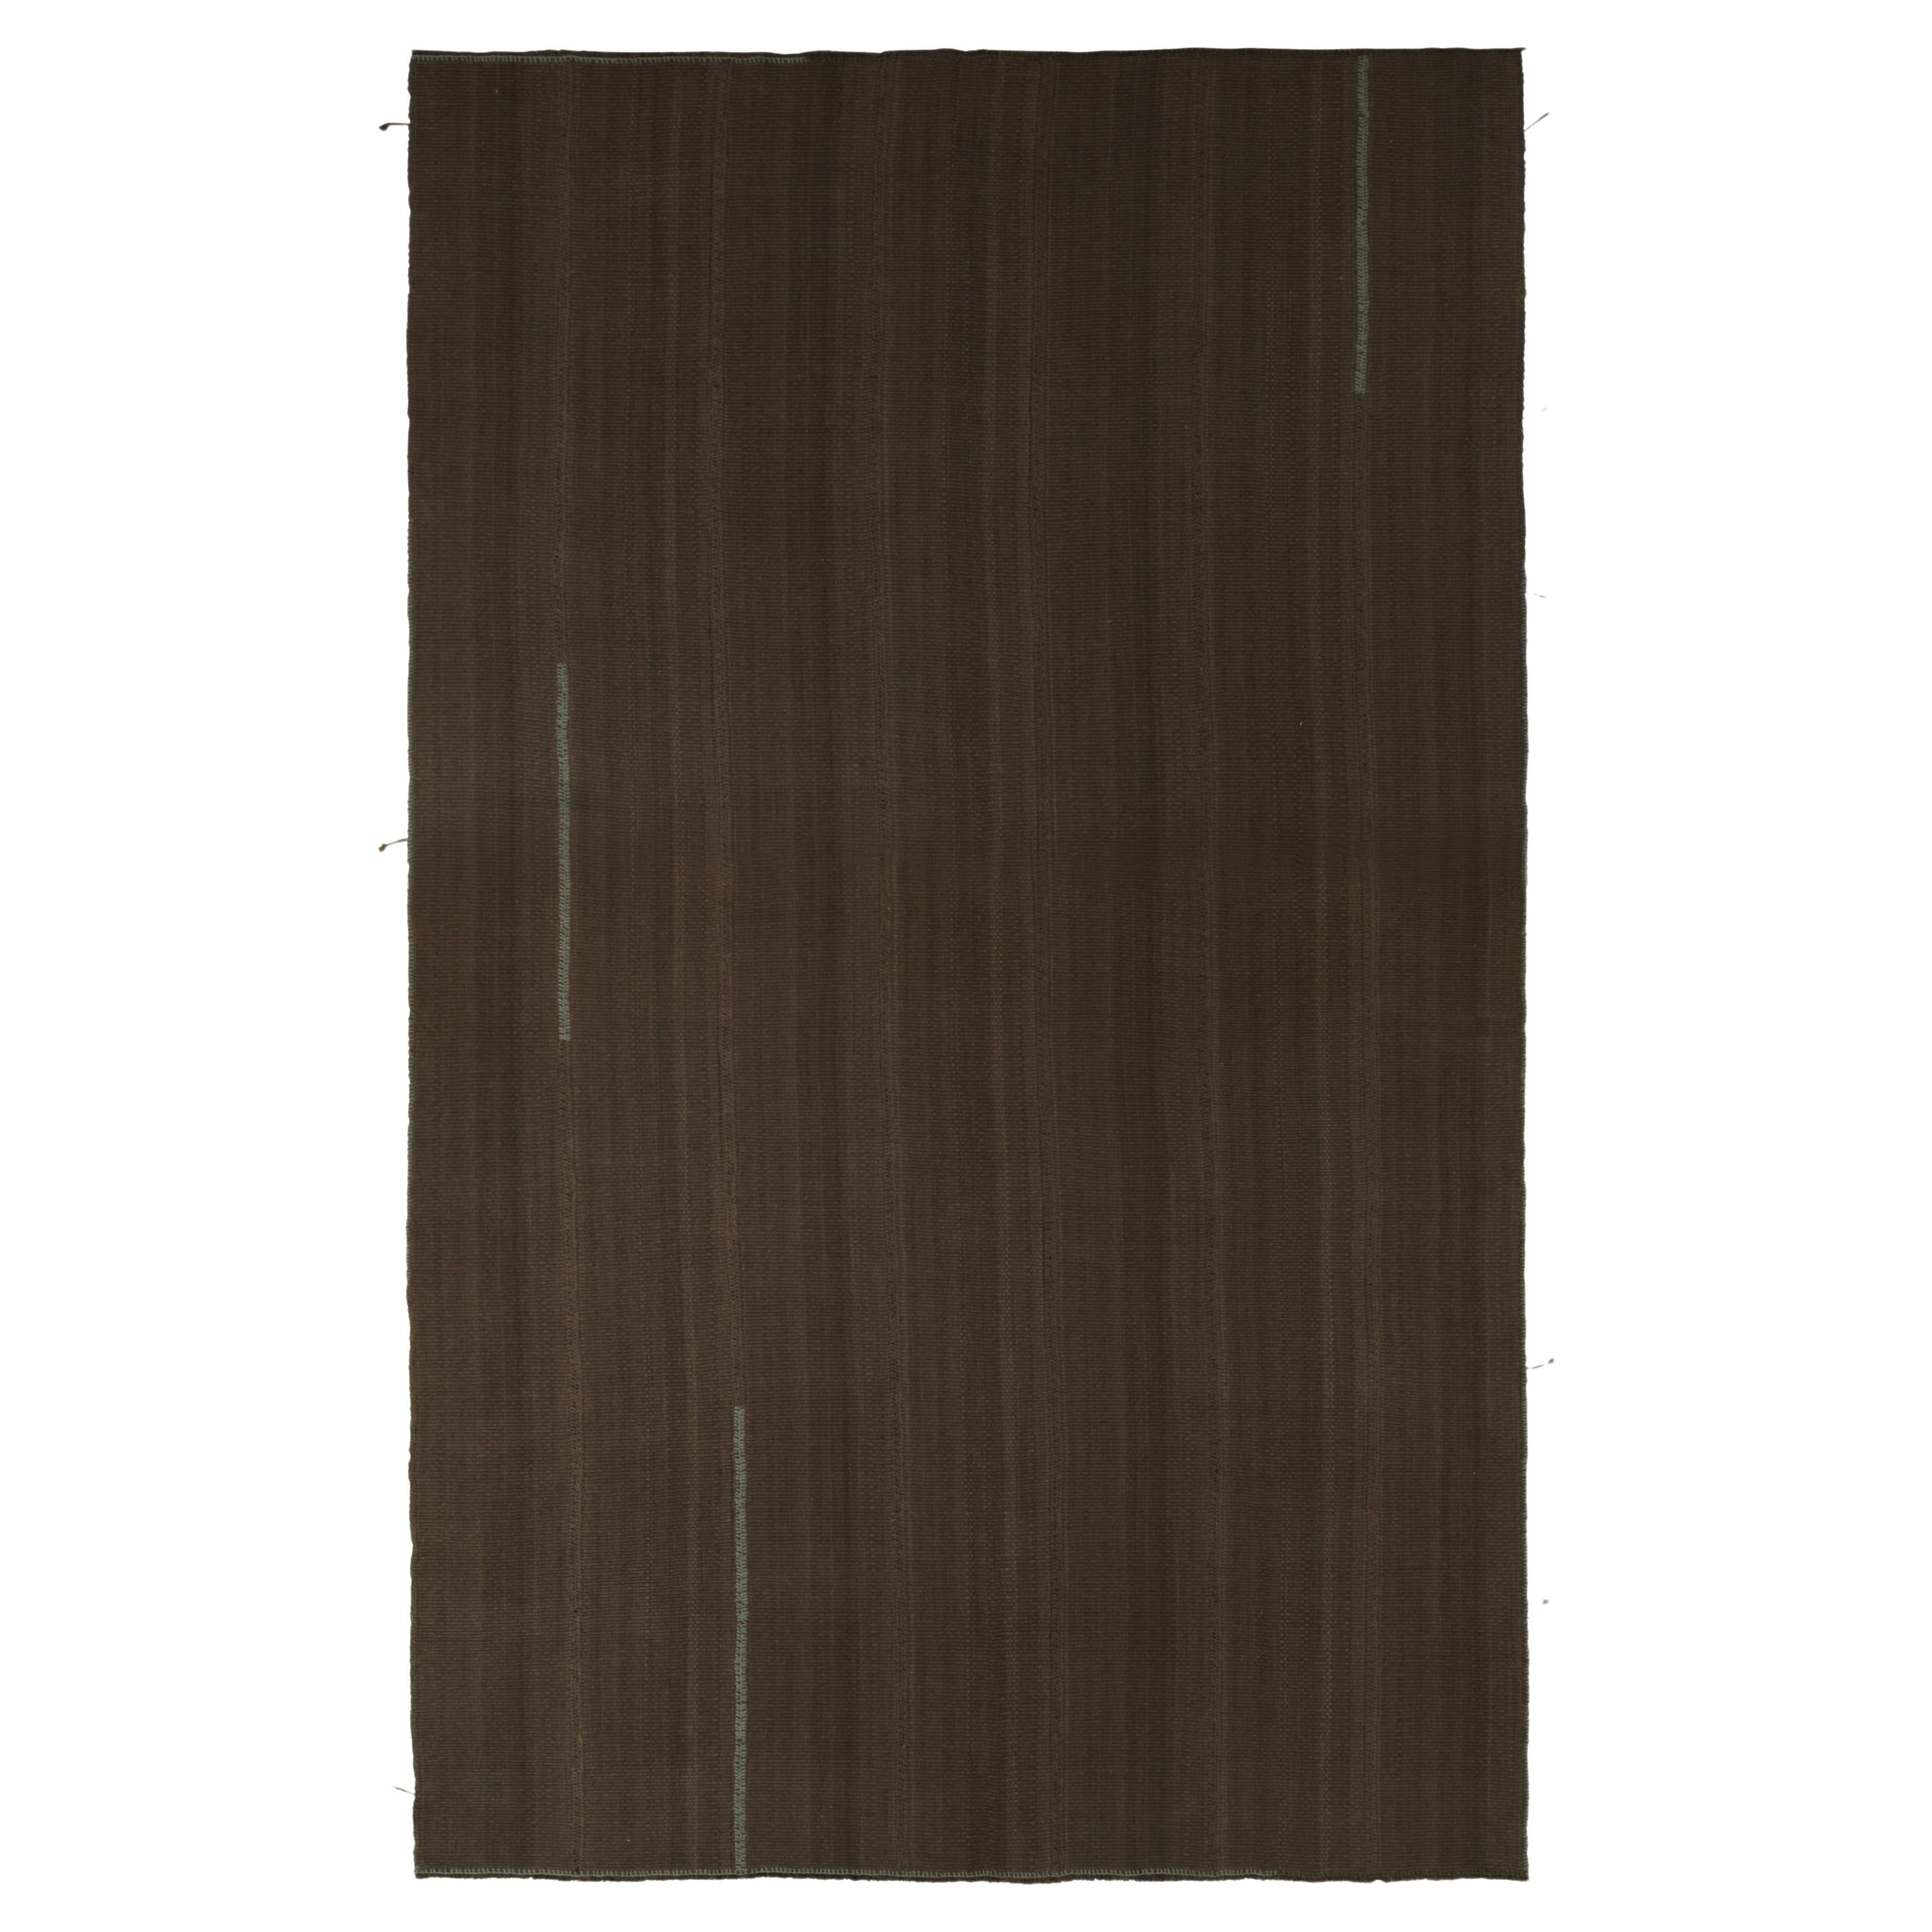 Rug & Kilim's Contemporary Oversized Kilim in Brown Muted Stripes, Blue Accents im Angebot